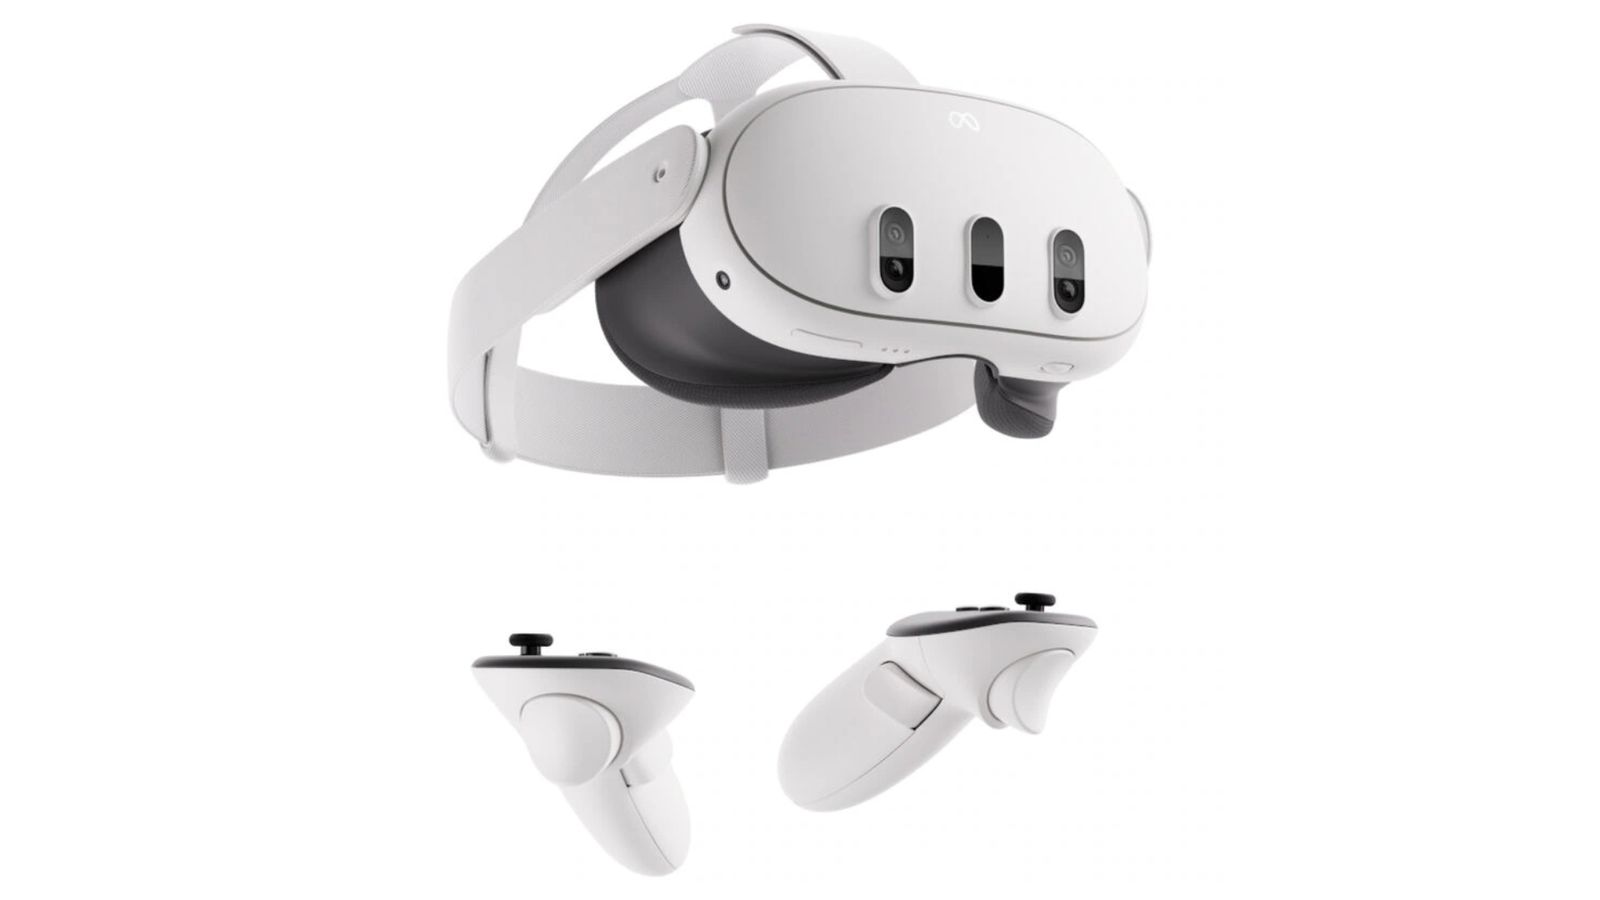 Meta Quest 3 product image of a white and black VR headset above a set of controllers.